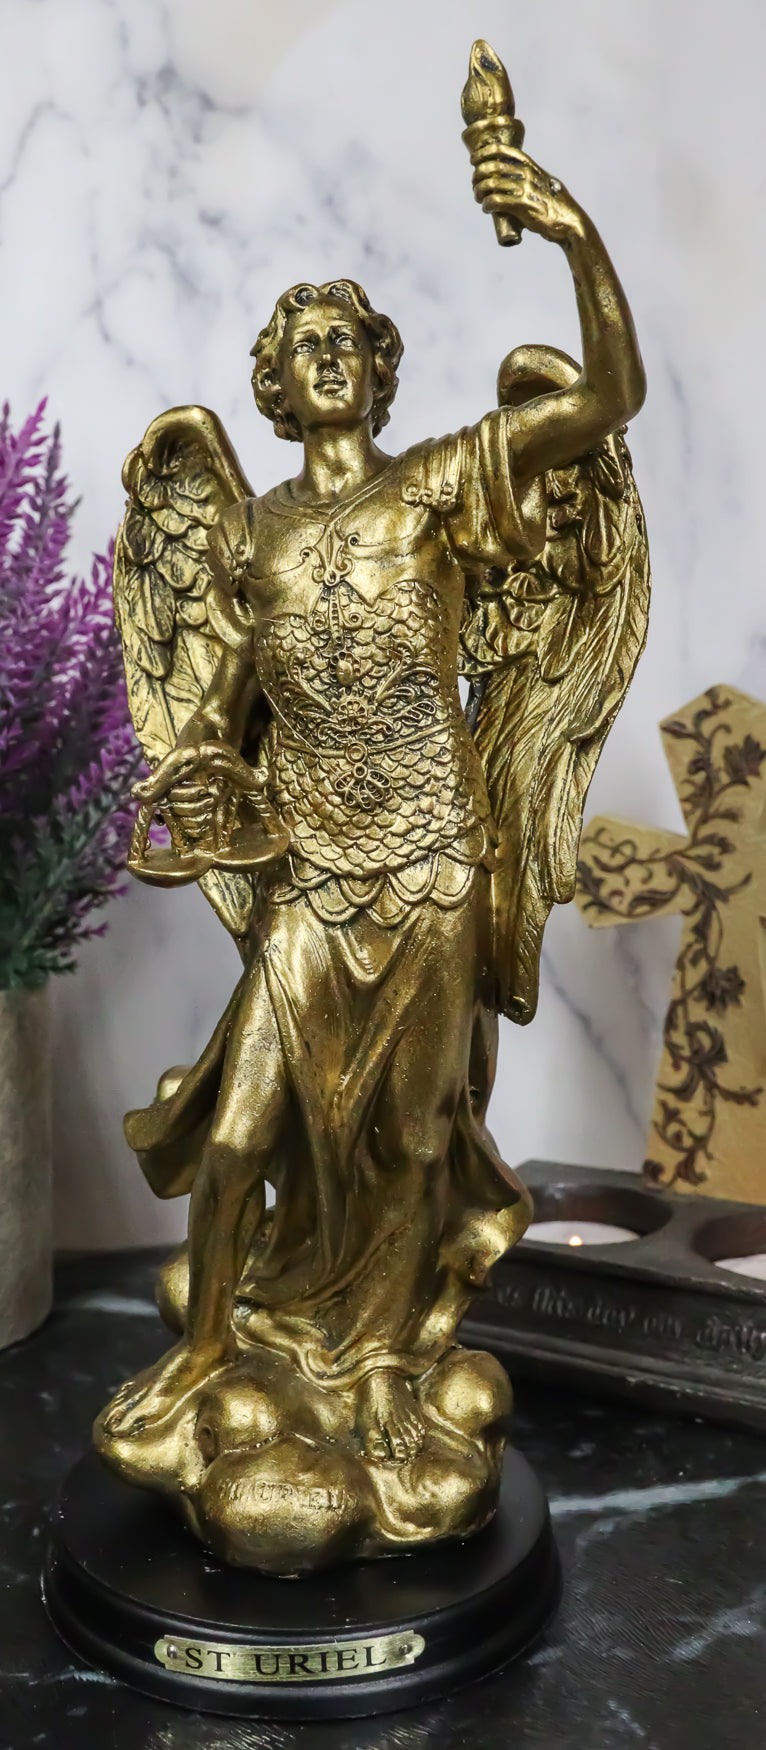 Catholic Saint Uriel The Archangel Statue 8"H Patron of Confirmation And Ecology